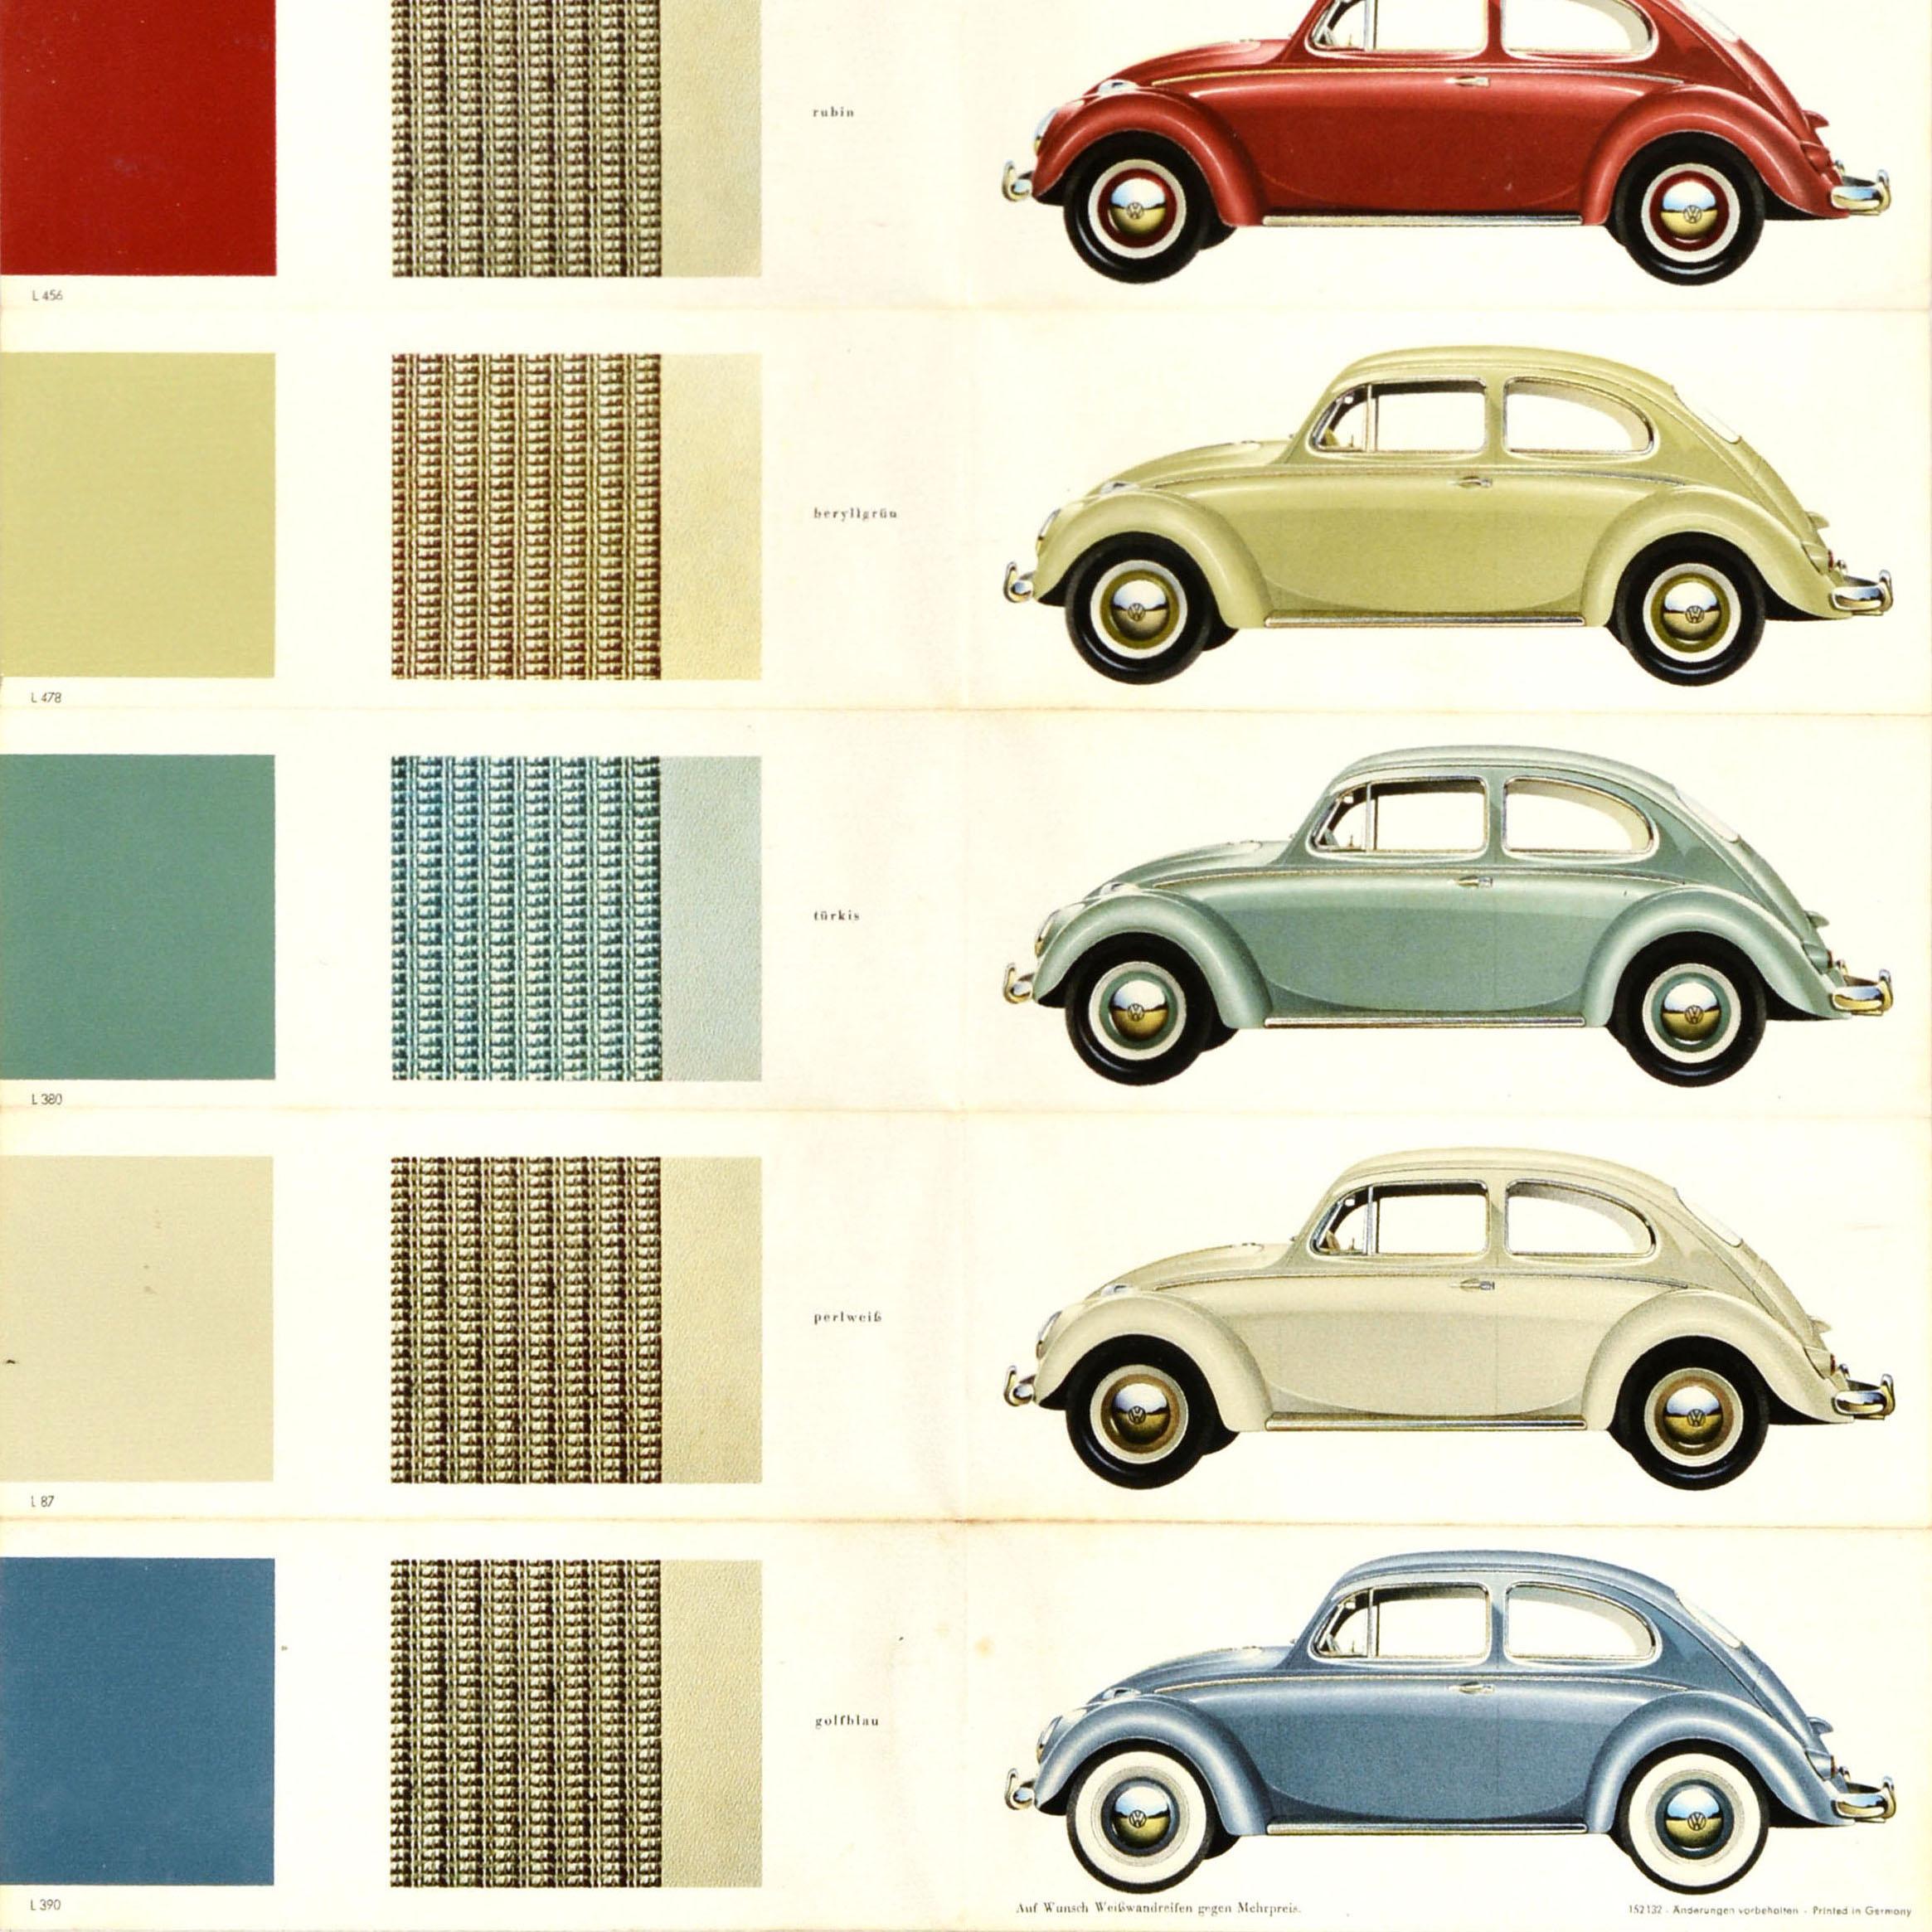 Original vintage Volkswagen car advertising poster - VW Limousine - featuring images of the car in different colours including black, pale blue, ruby red and pearl white with a note - Auf wunsch Weißwandreifen gegen Mehrpreis / White wall tyres